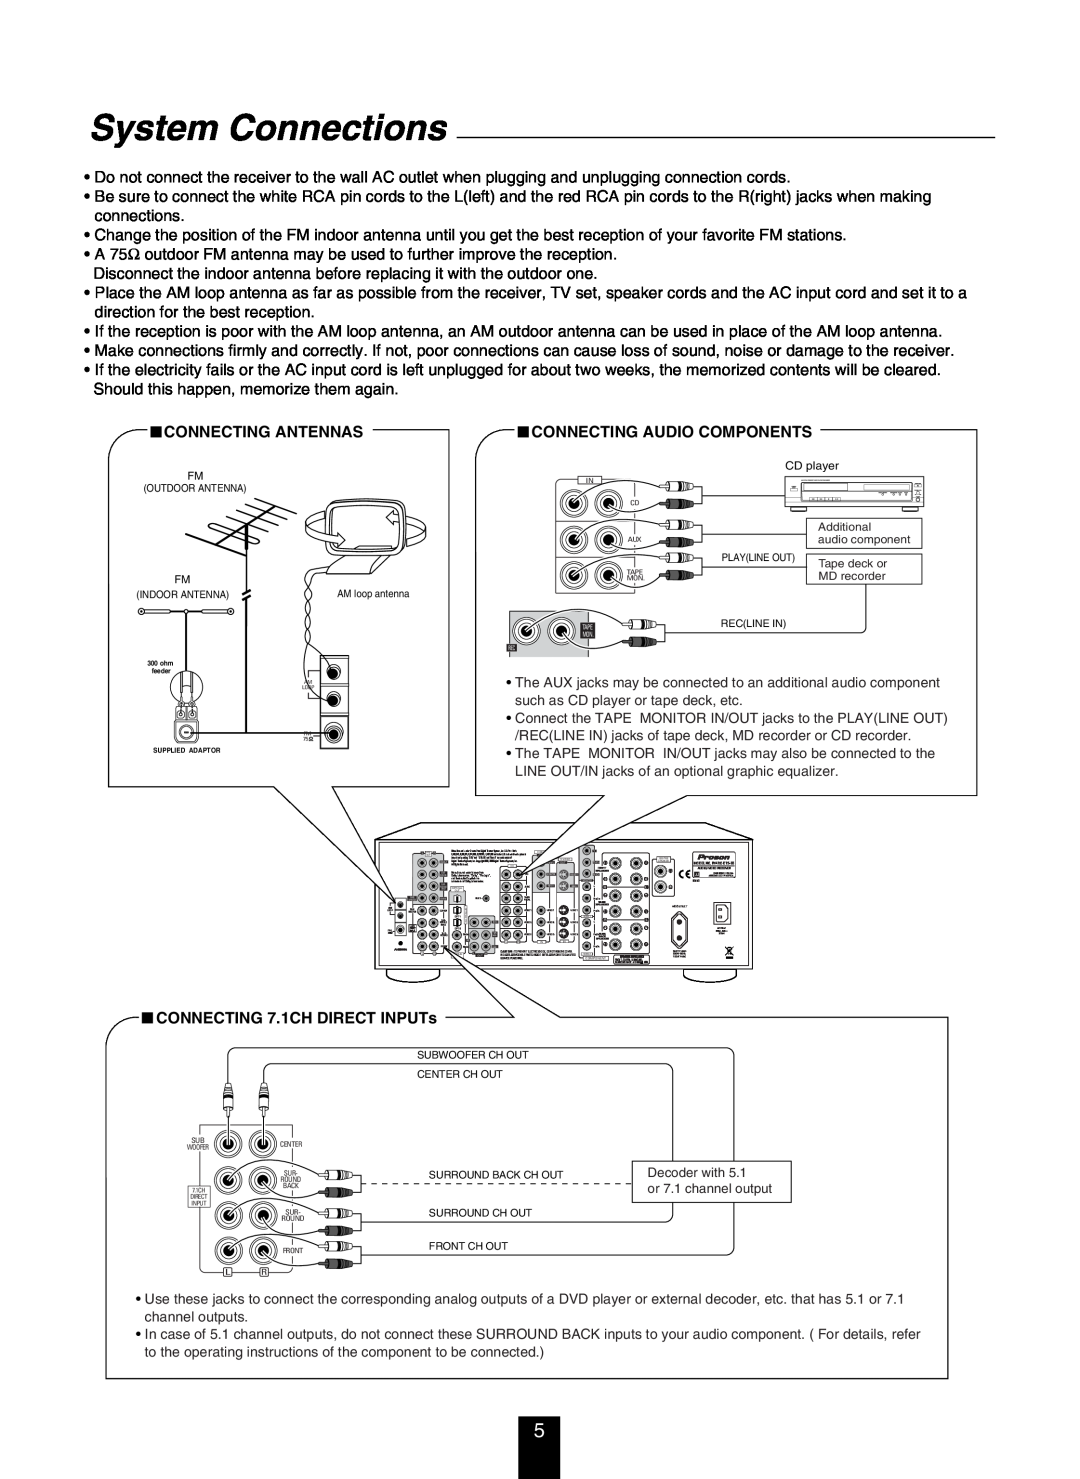 DTS RV4700 DTS-ES System Connections, Connecting Antennas, Connecting Audio Components, CONNECTING 7.1CH DIRECT INPUTs 